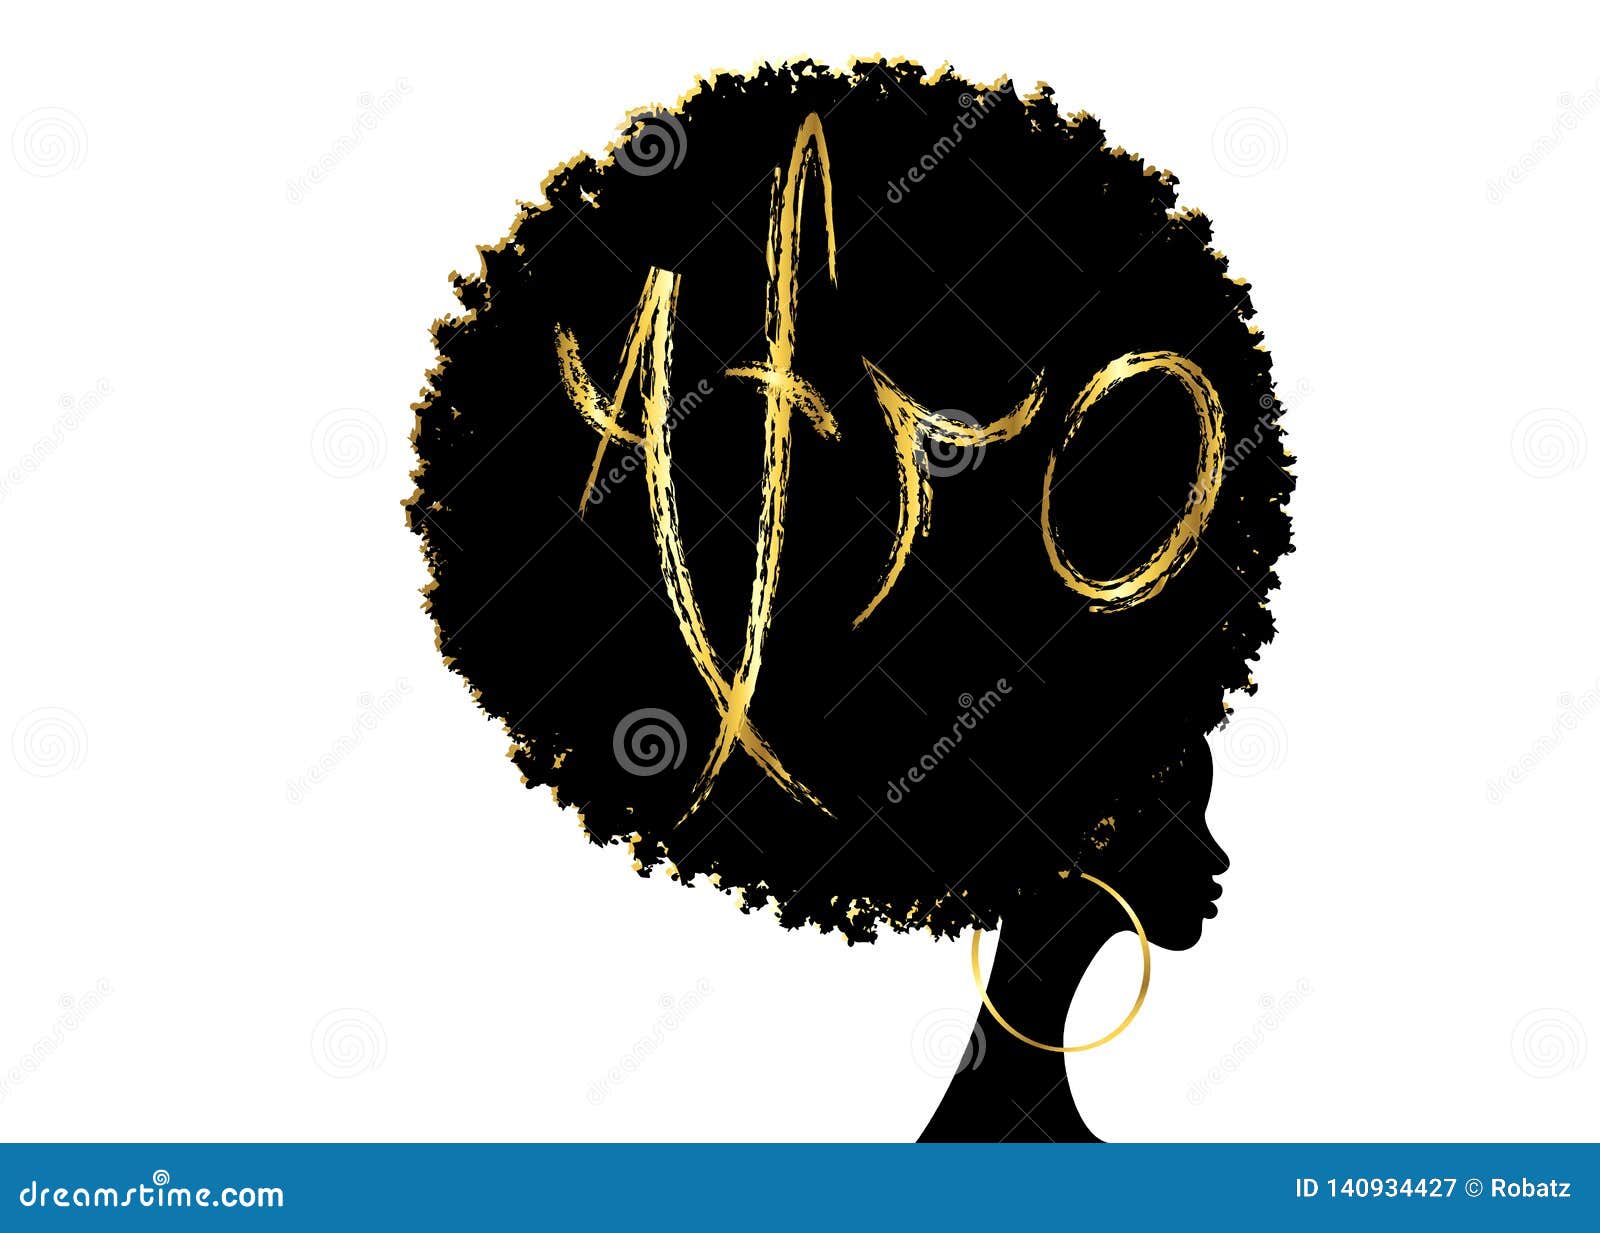 curly afro hair, portrait african women , dark skin female face with curly hair afro, ethnic traditional golden earrings